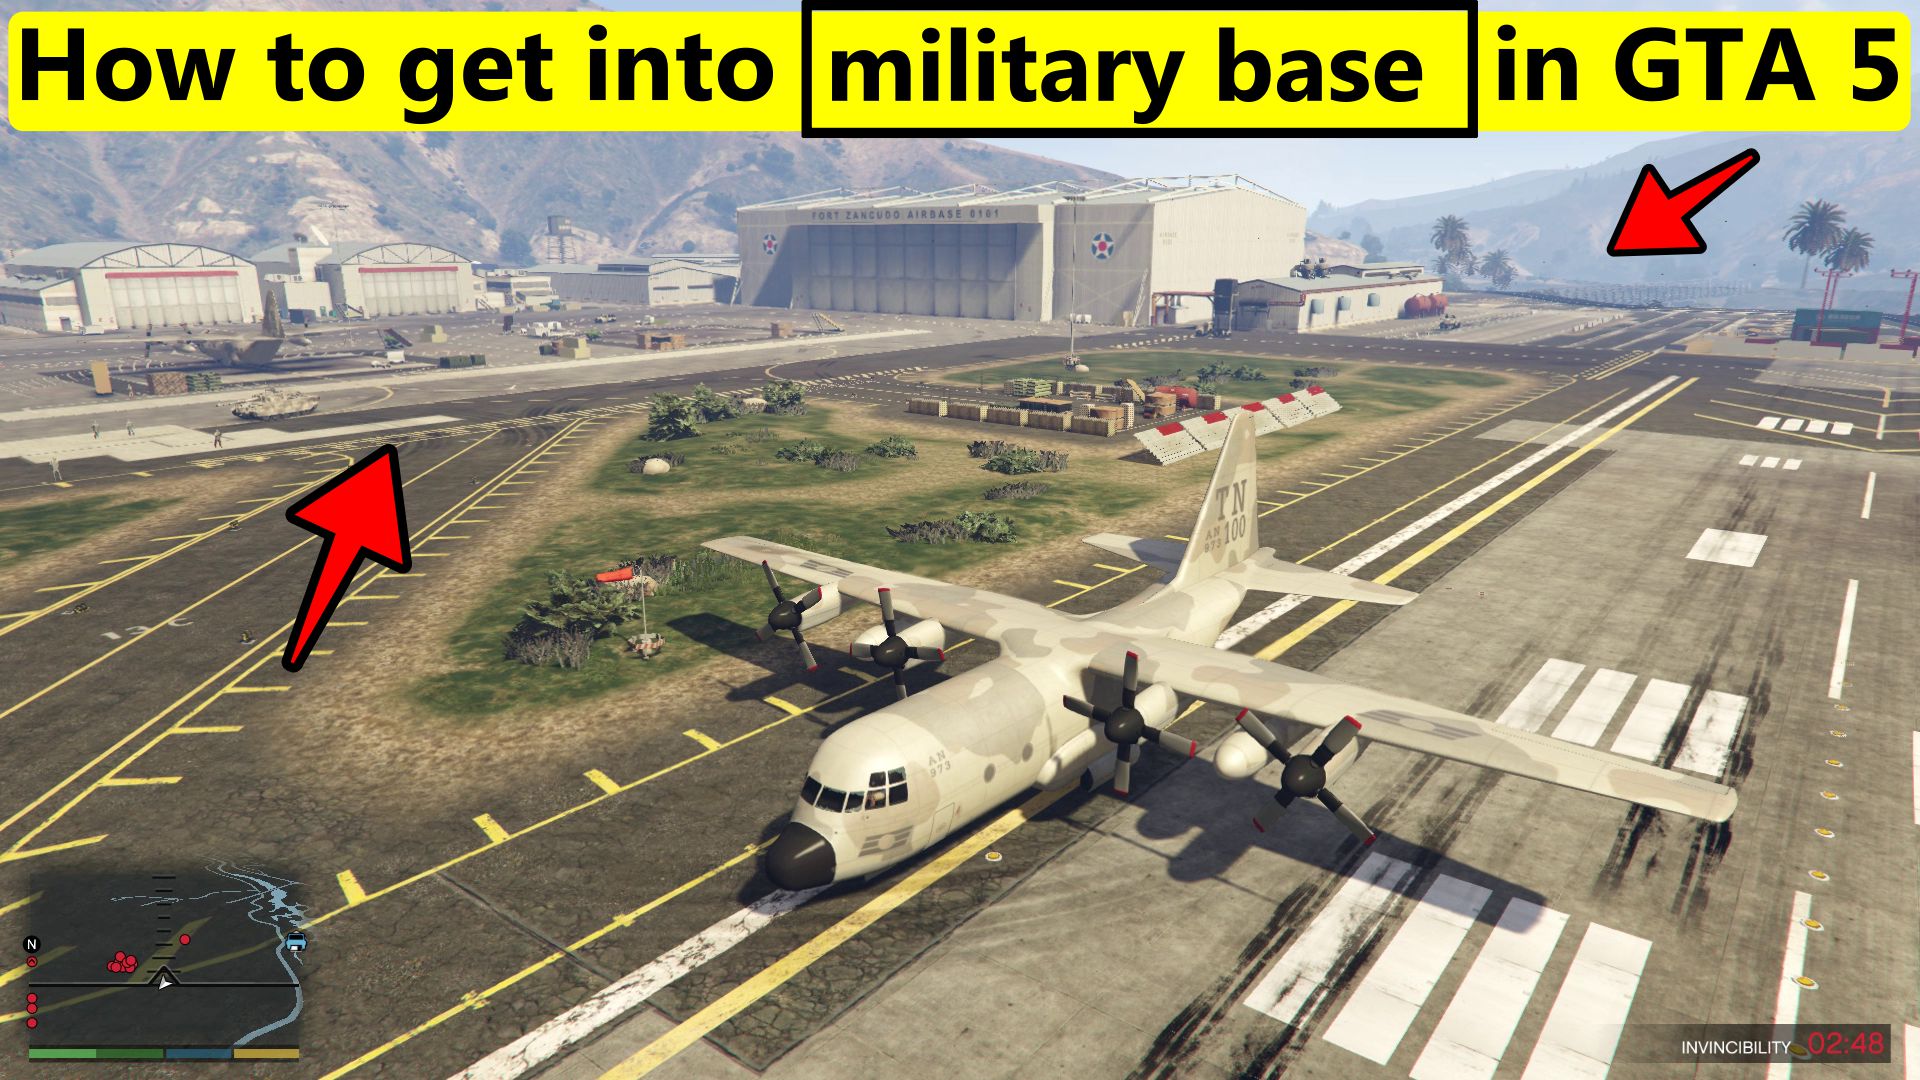 How to get into military base in GTA 5 - (Story Mode or Online)